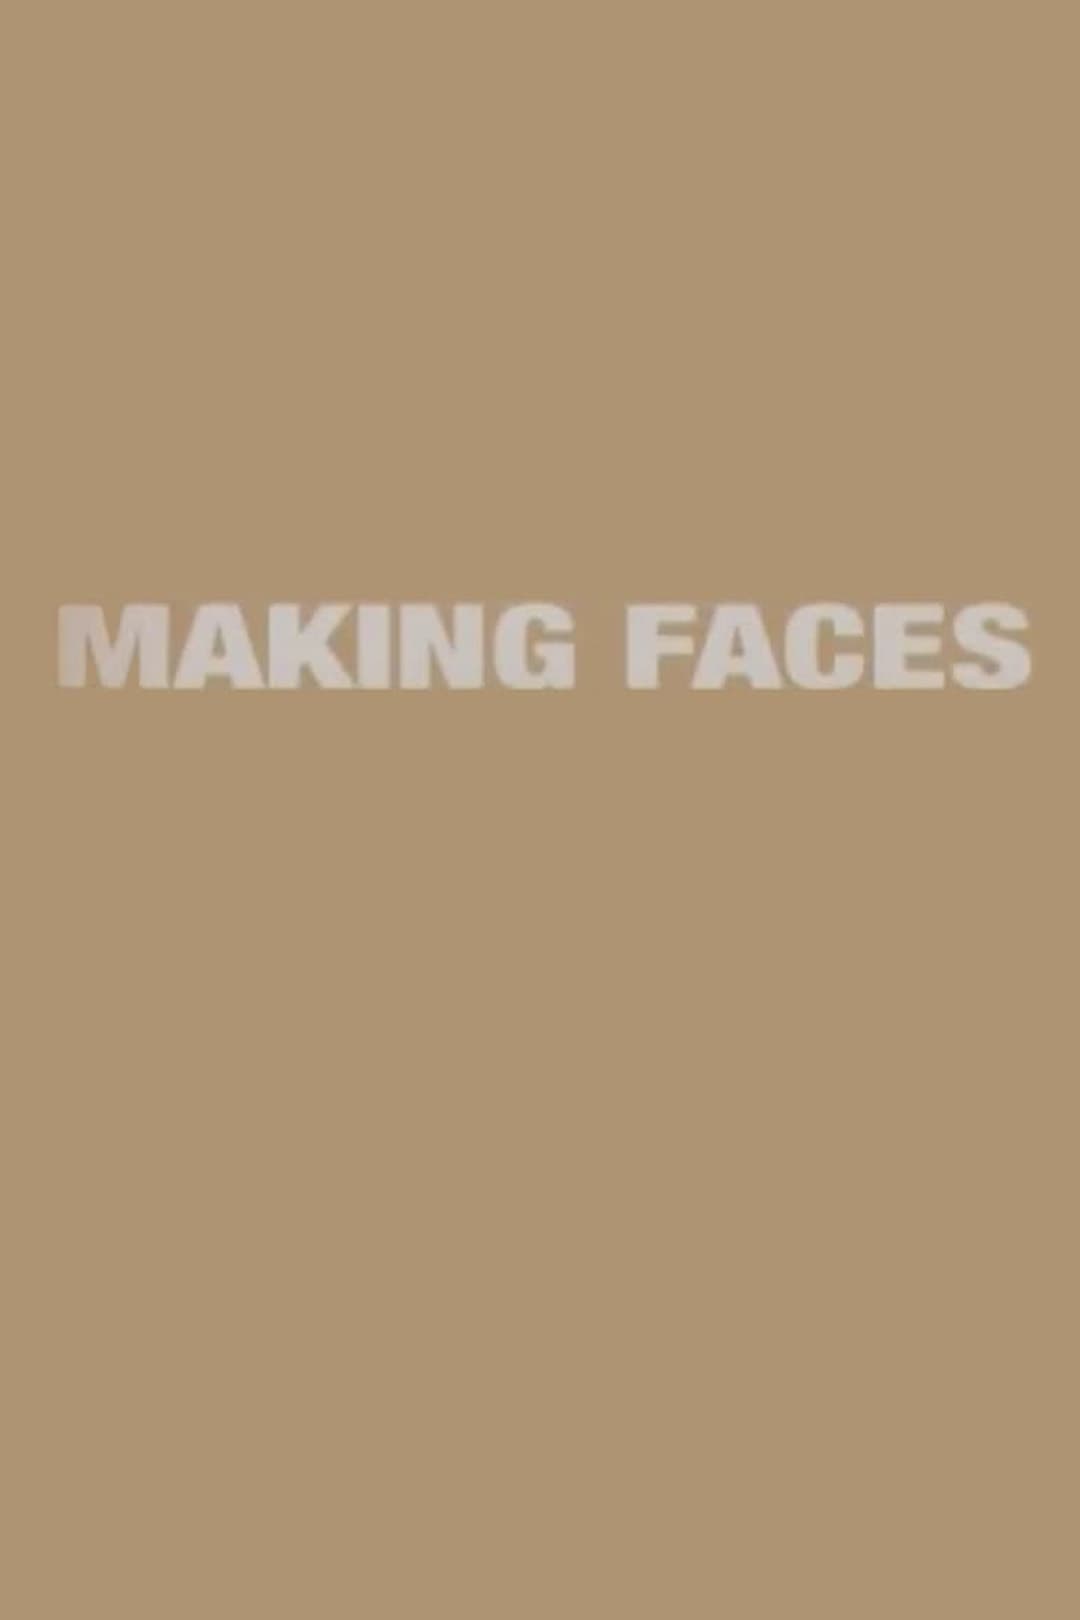 Making Faces (2004)